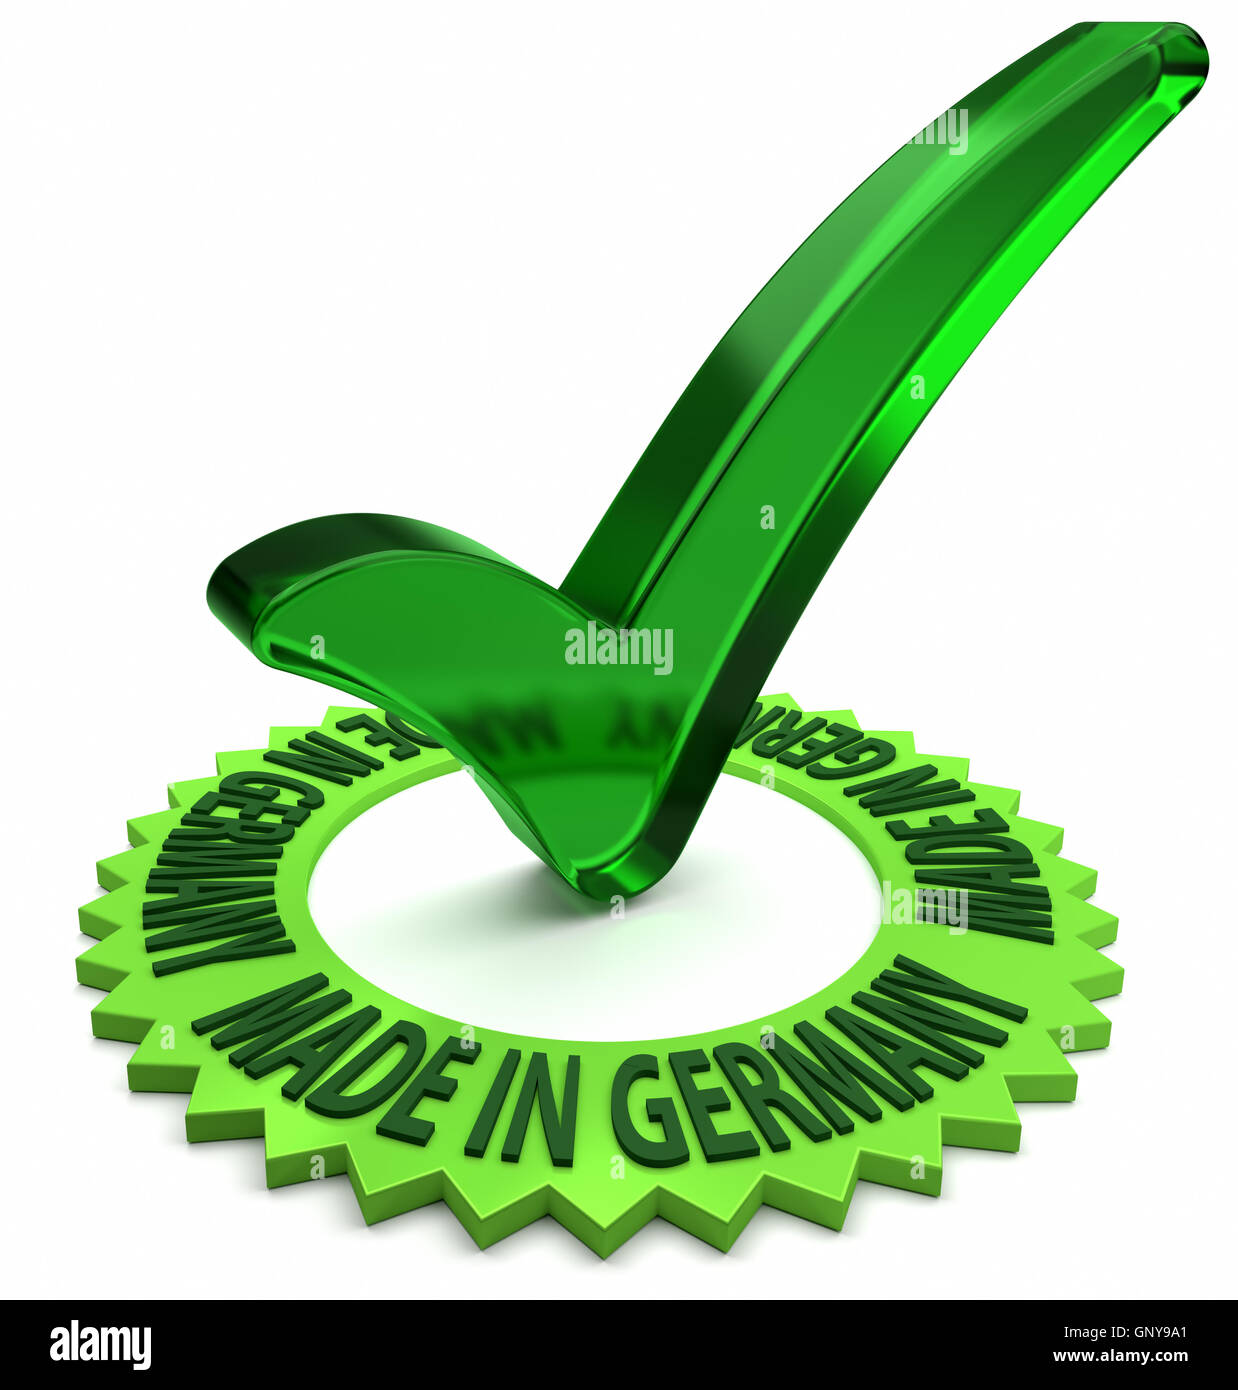 Made in Germany Stock Photo